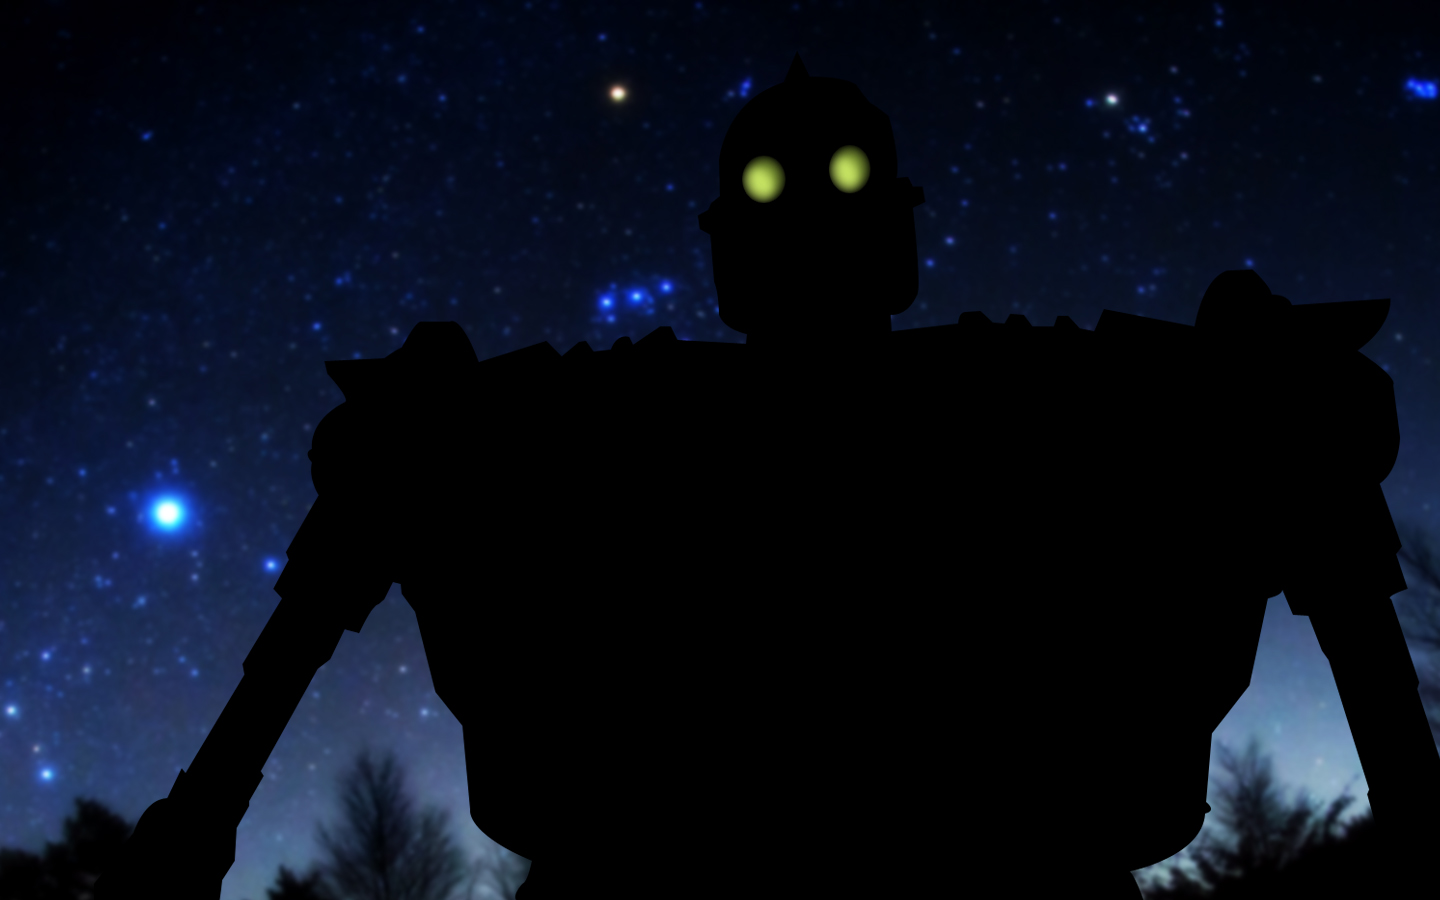 The Iron Giant Wallpapers